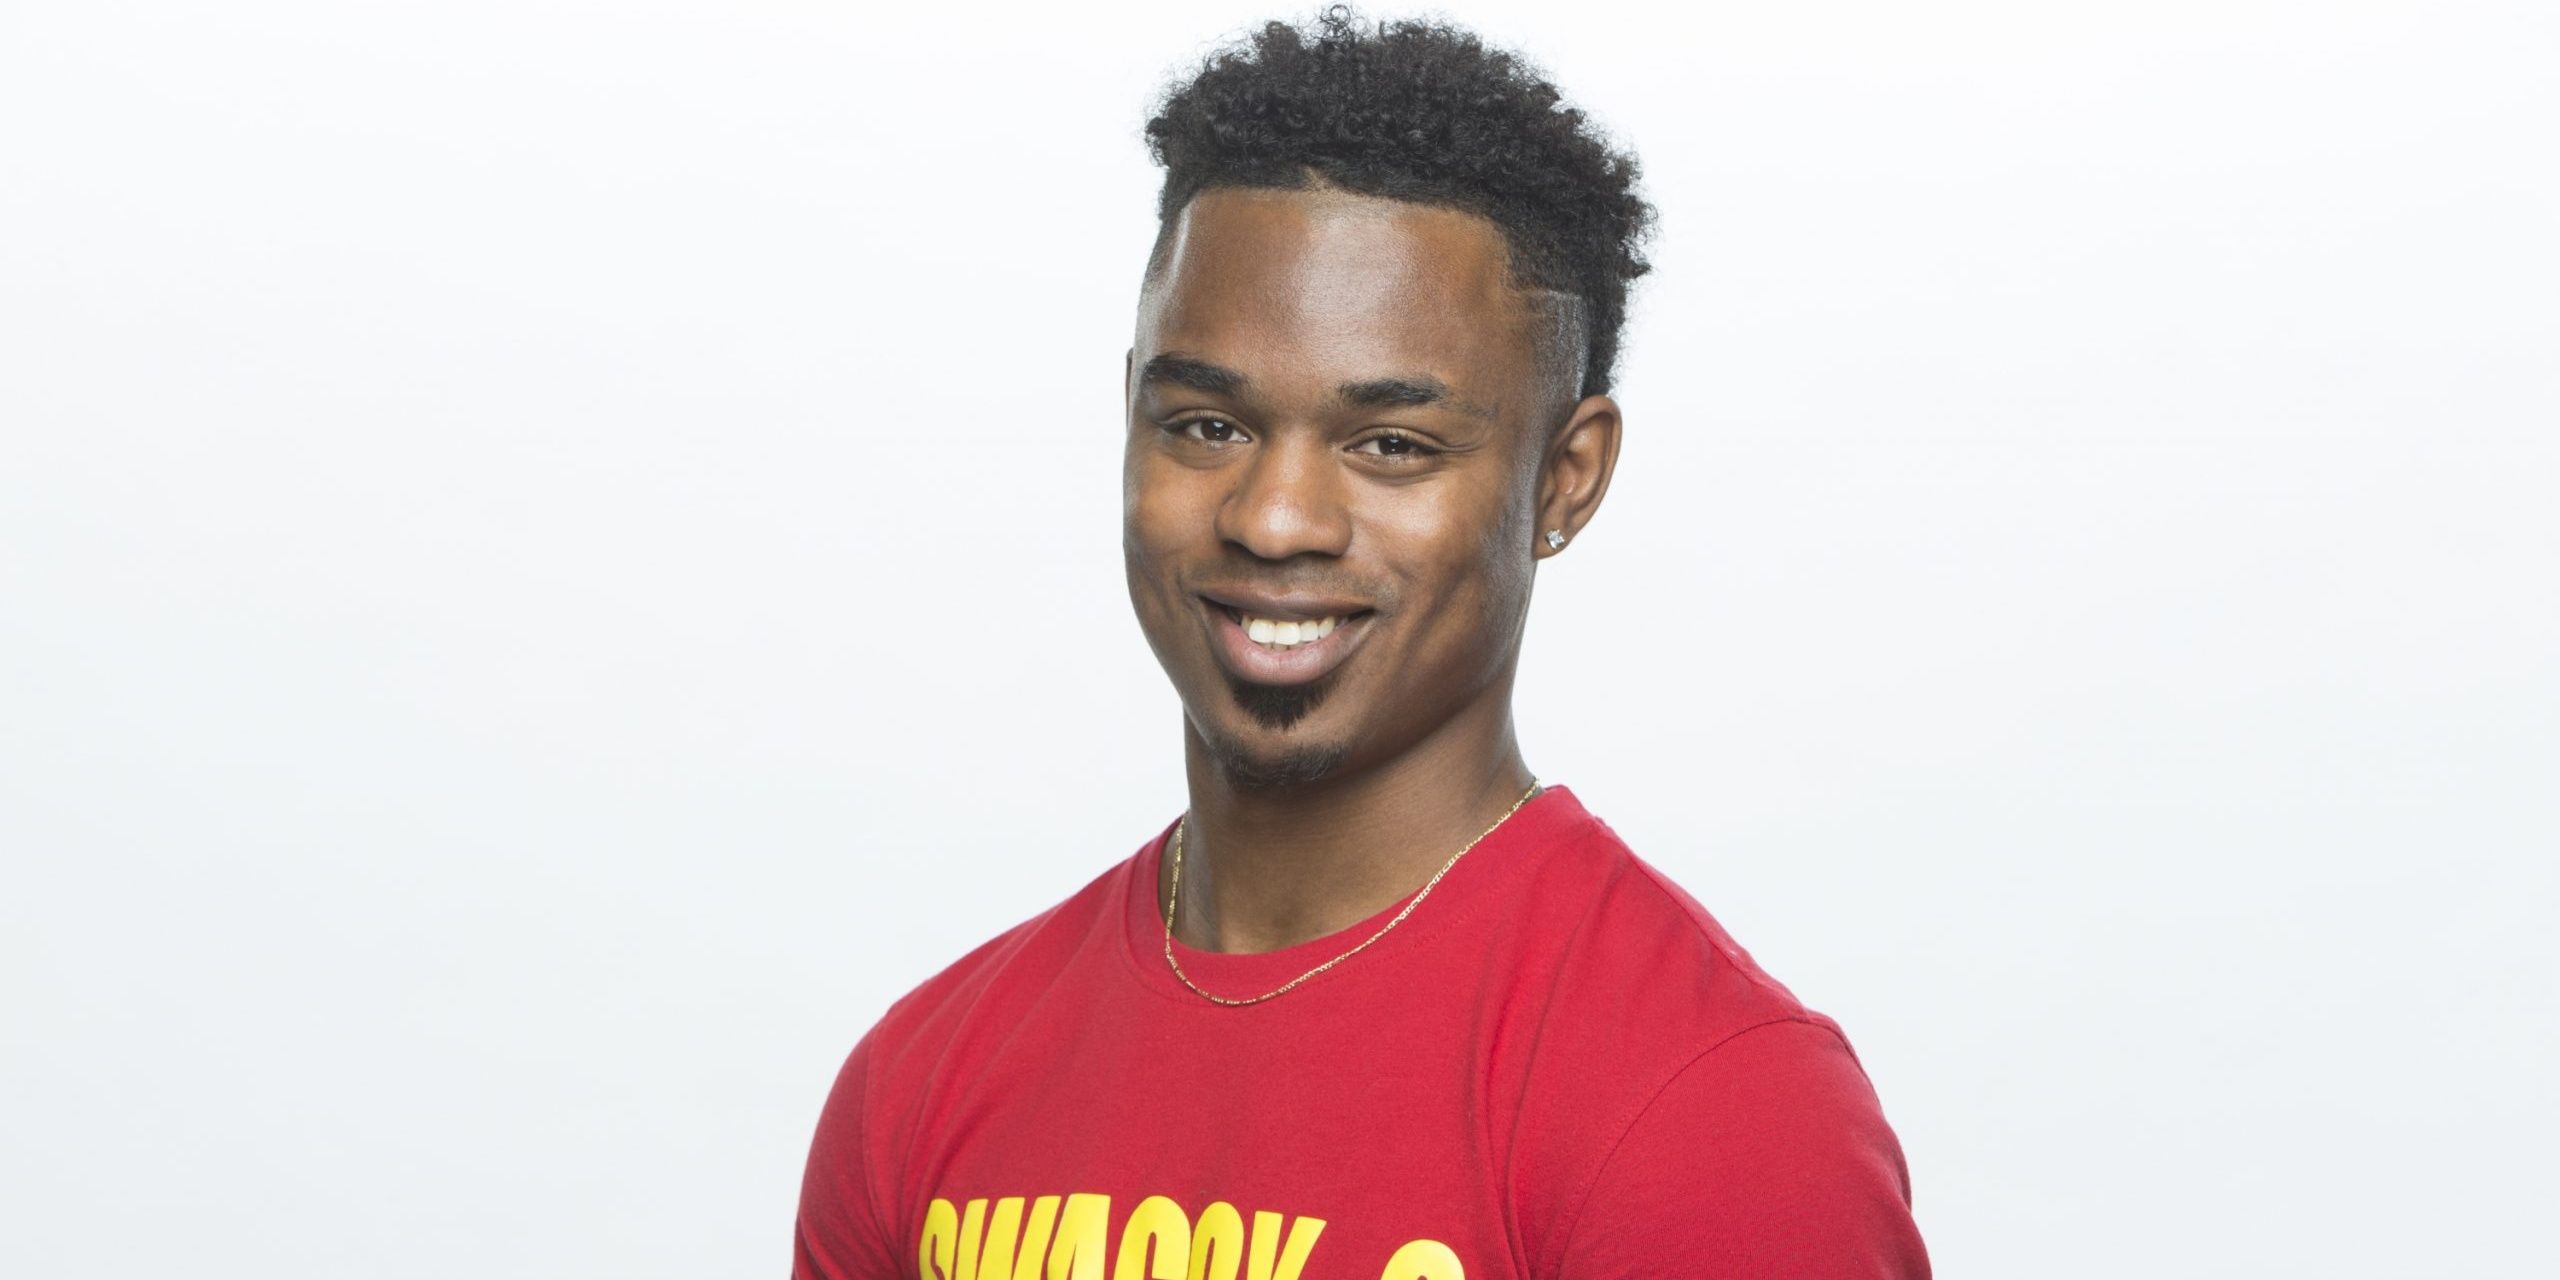 Chris Williams aka Swaggy appears in a prommo image for Big Brother 20